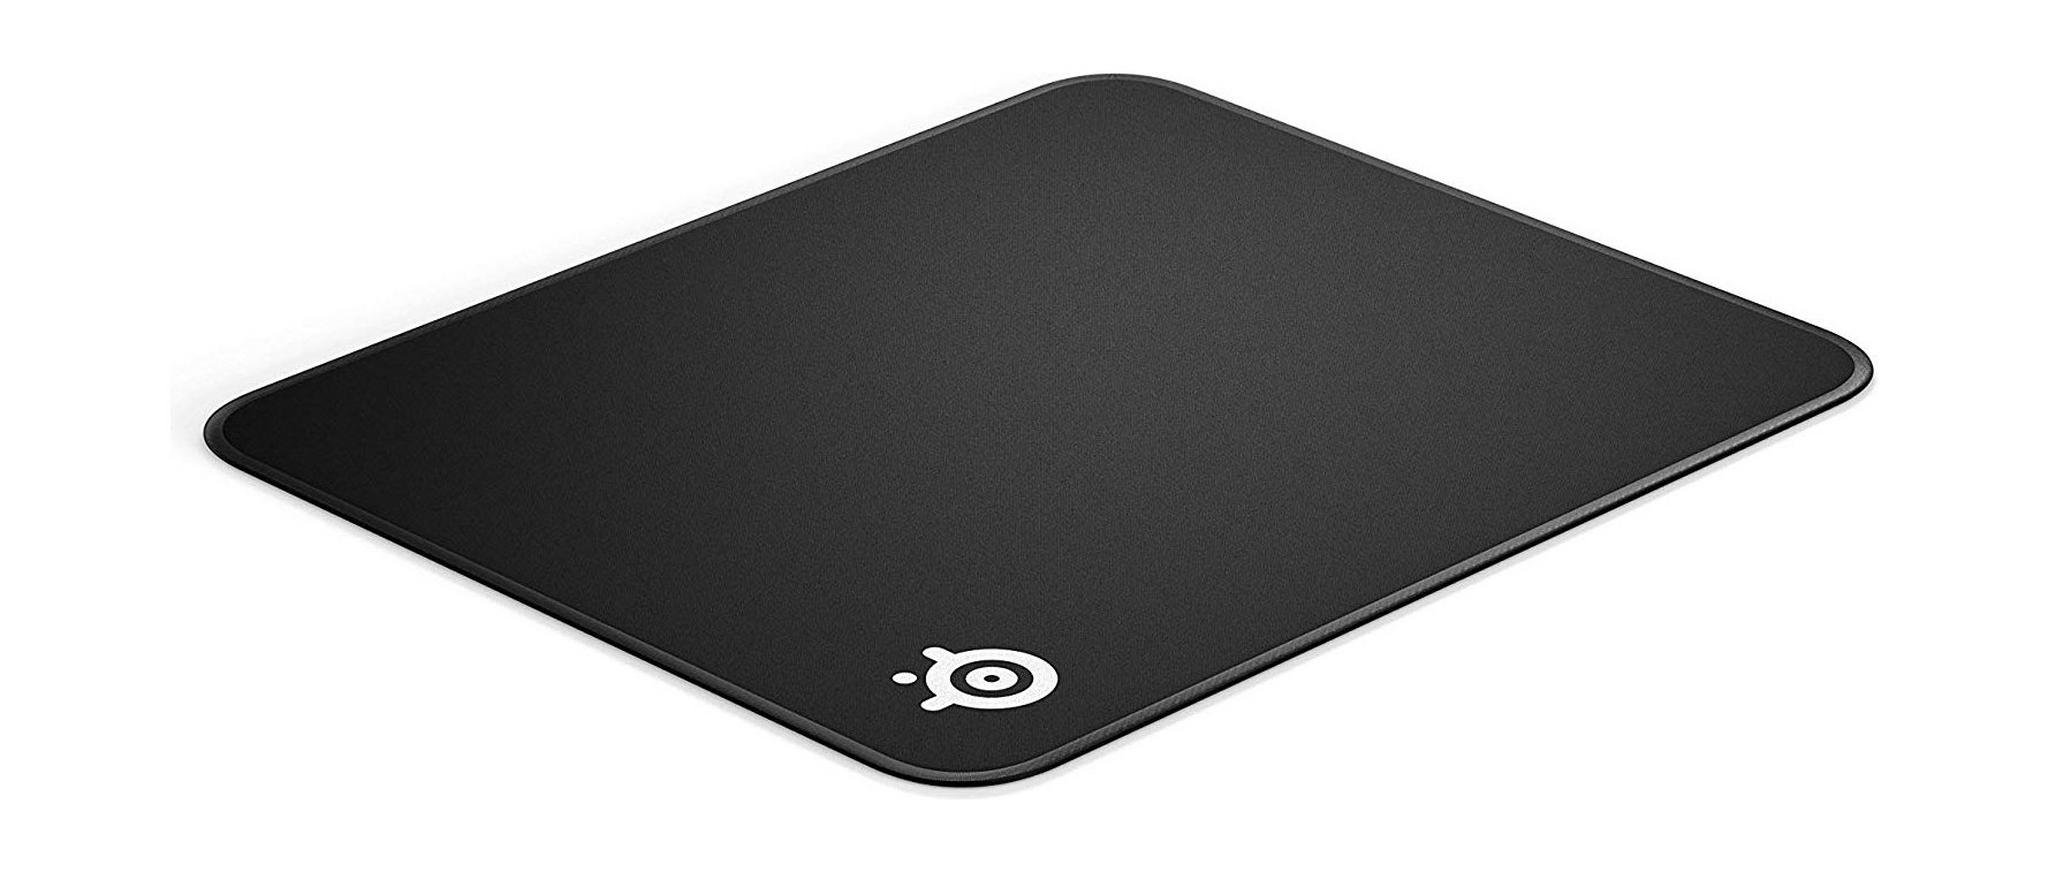 SteelSeries QcK Edge Woven Cloth Mousepad - Large